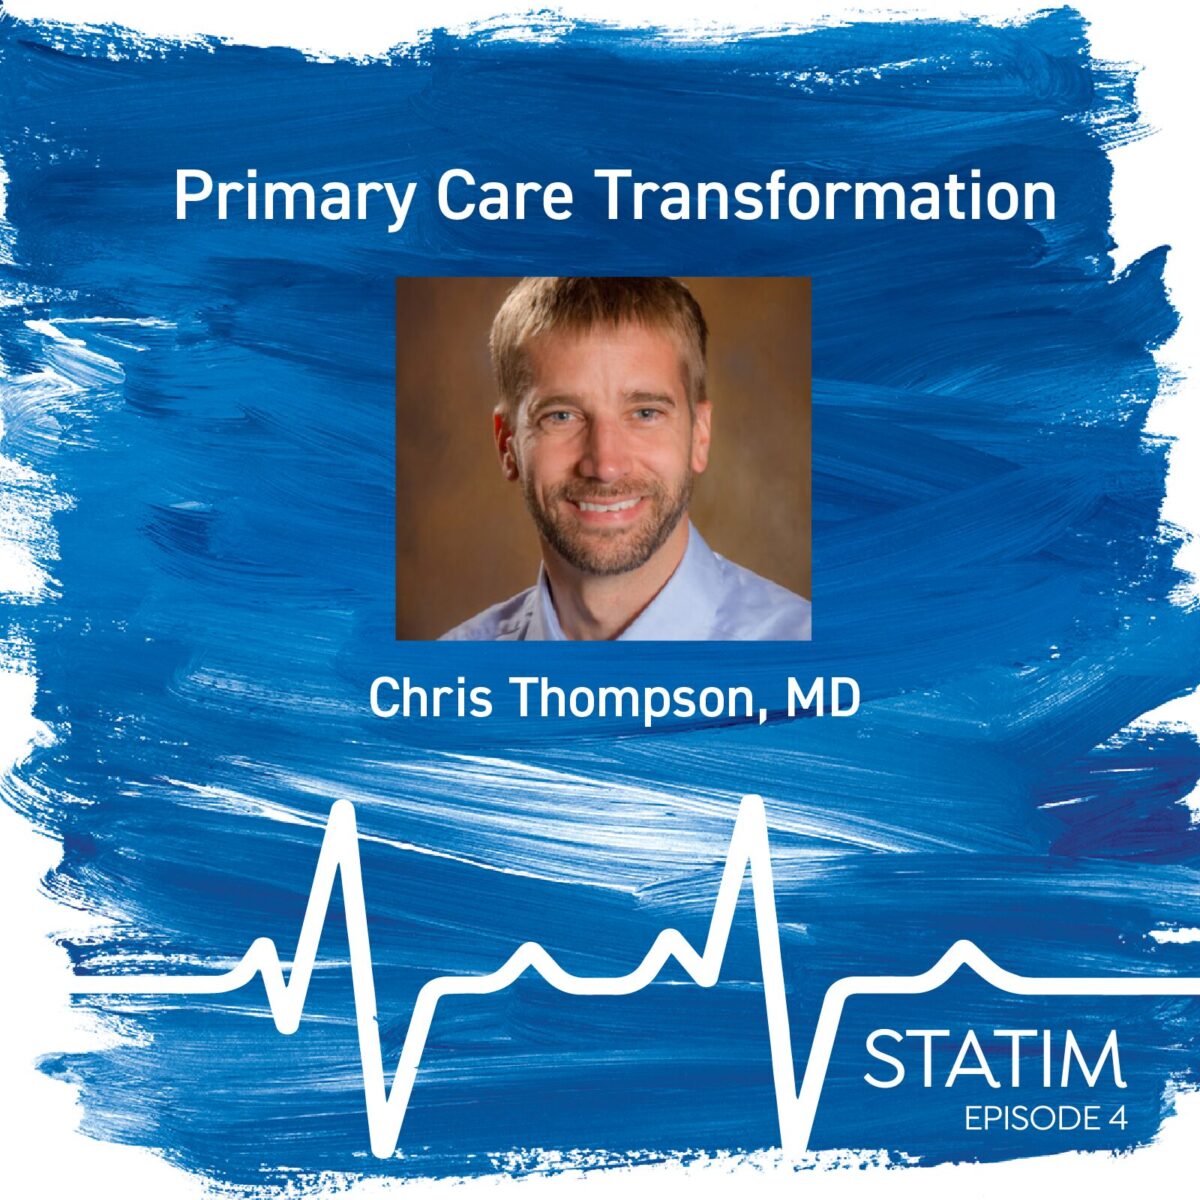 Graphic promotion for STATIM episode 4 with Dr. Chris Thompson on Primary Care Transformation